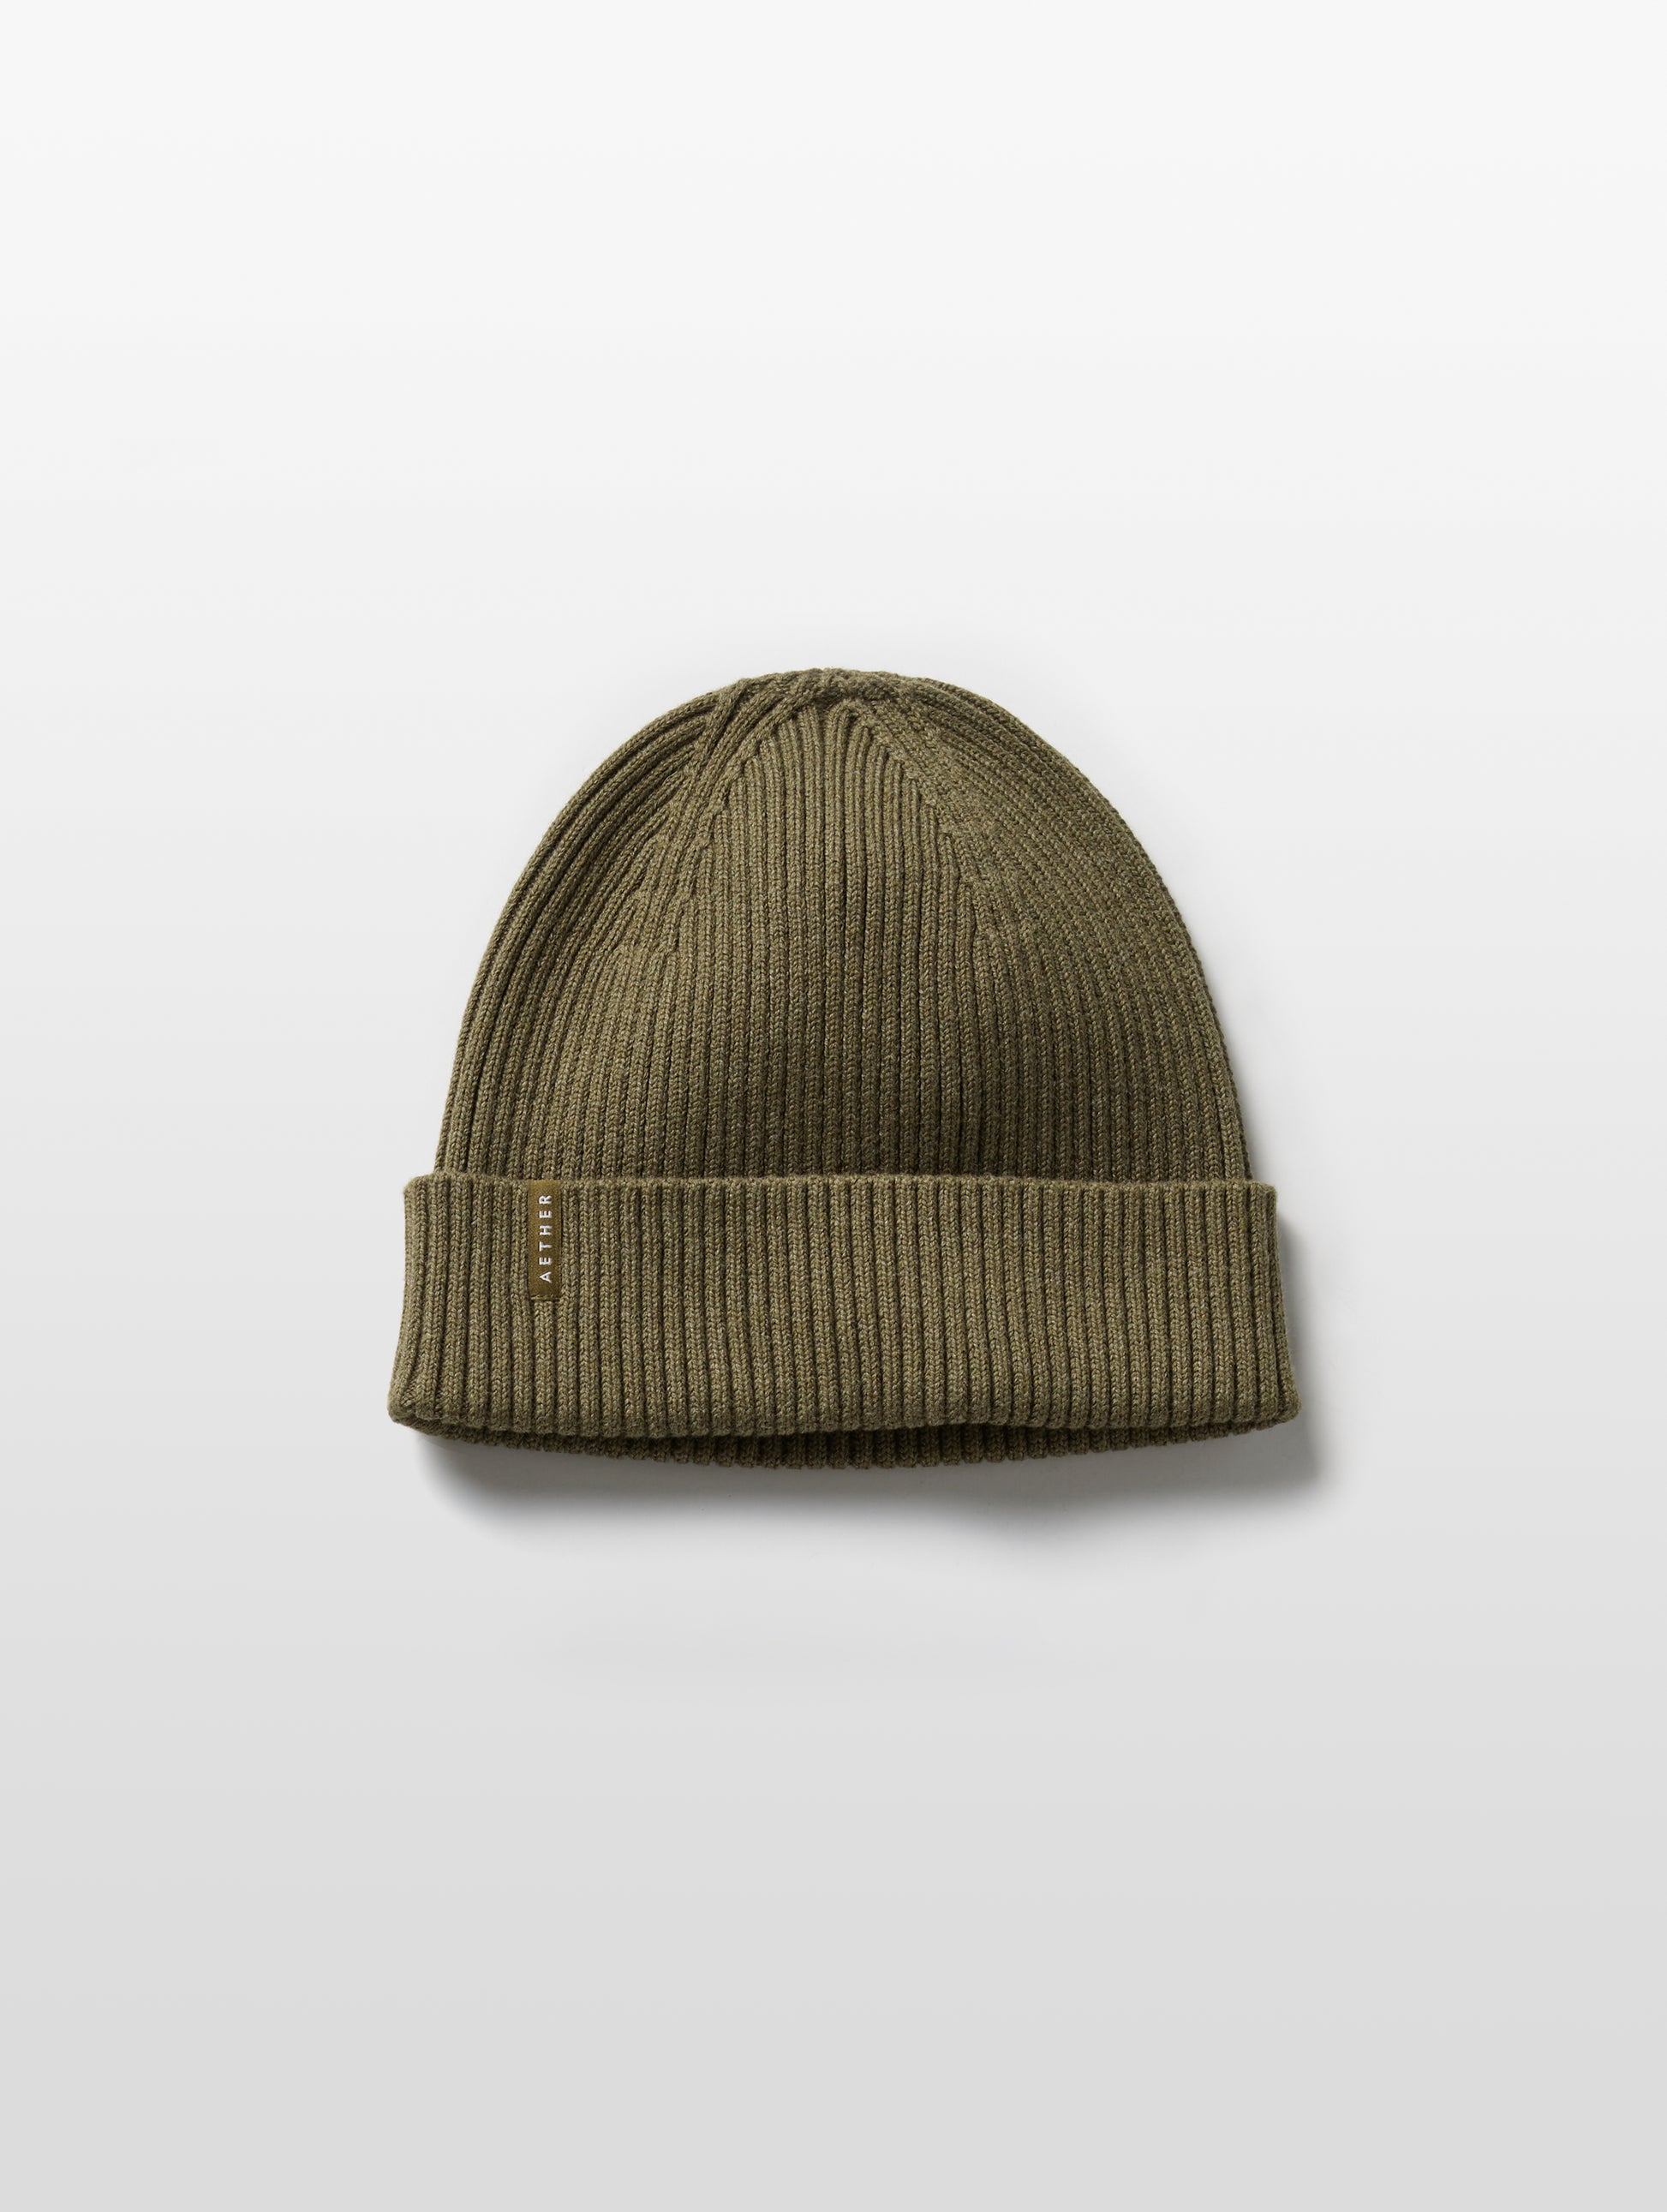 green cotton beanie from AETHER Apparel